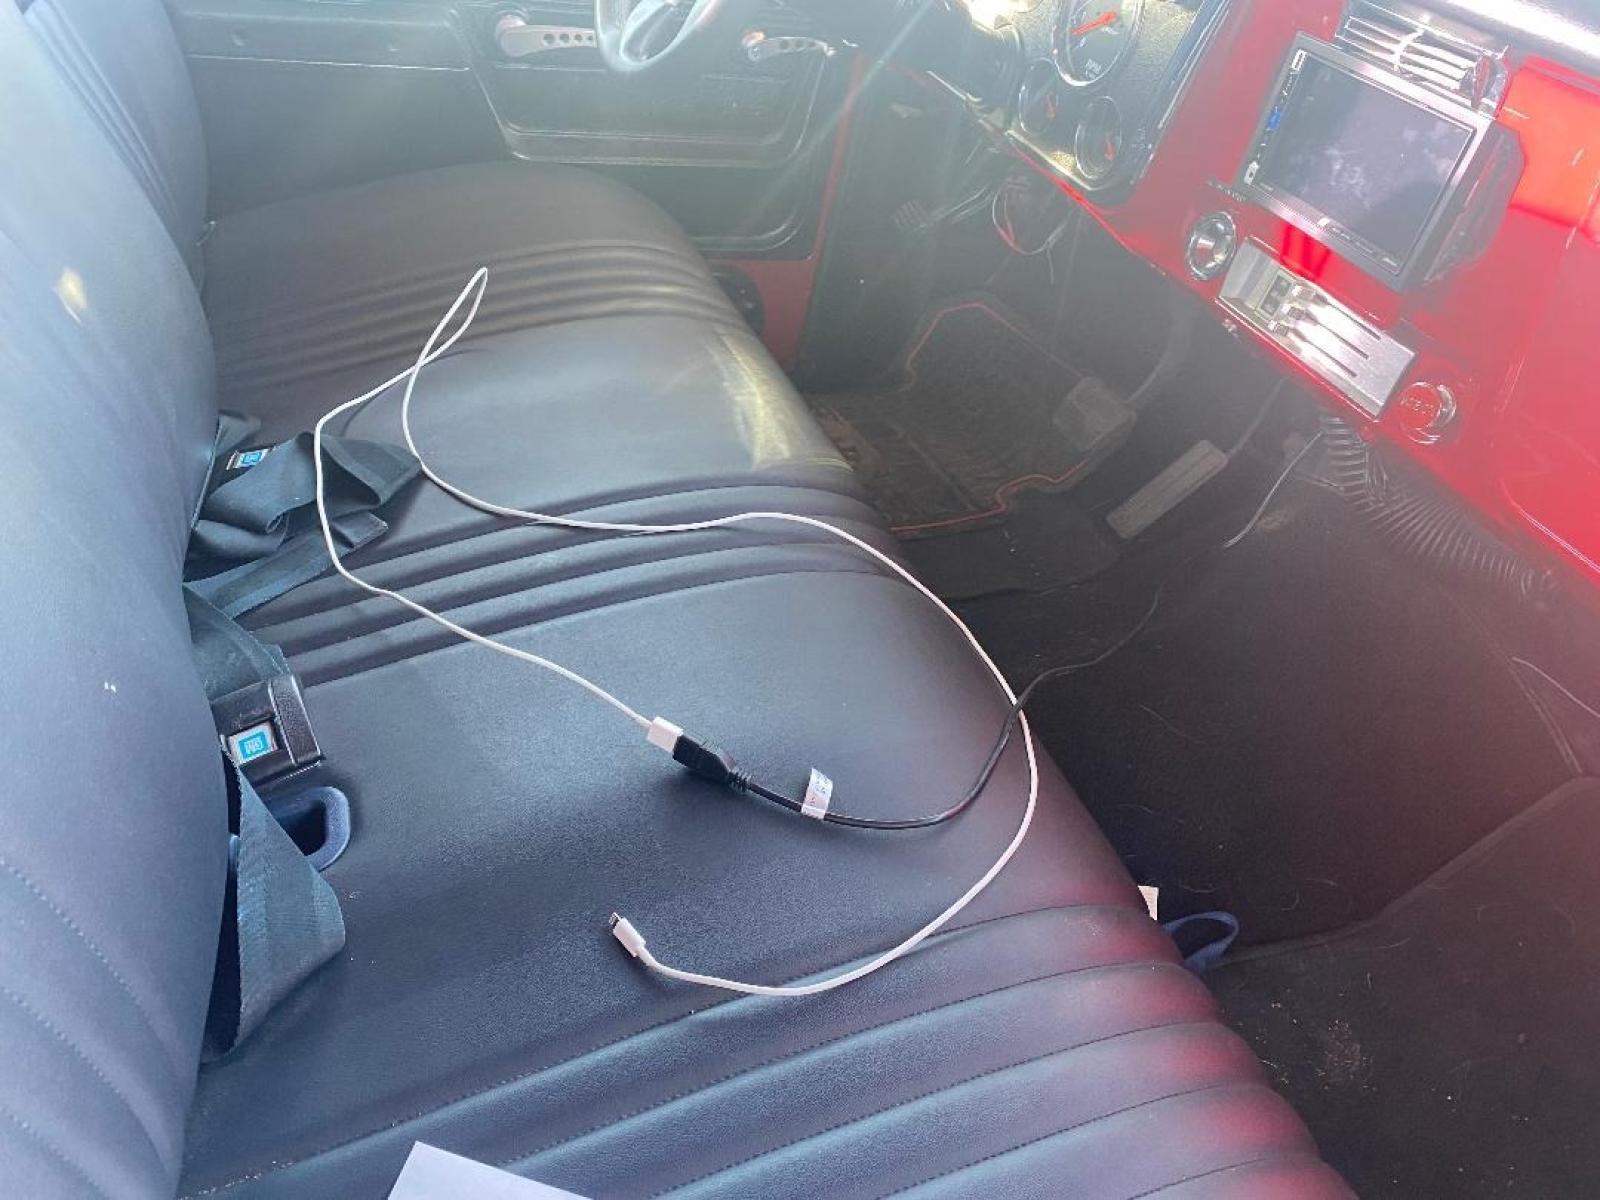 1972 Red Chevrolet C10 (CCE142A1201) , Automatic transmission, located at 1687 Business 35 S, New Braunfels, TX, 78130, (830) 625-7159, 29.655487, -98.051491 - 580 Horse Power - Photo #11